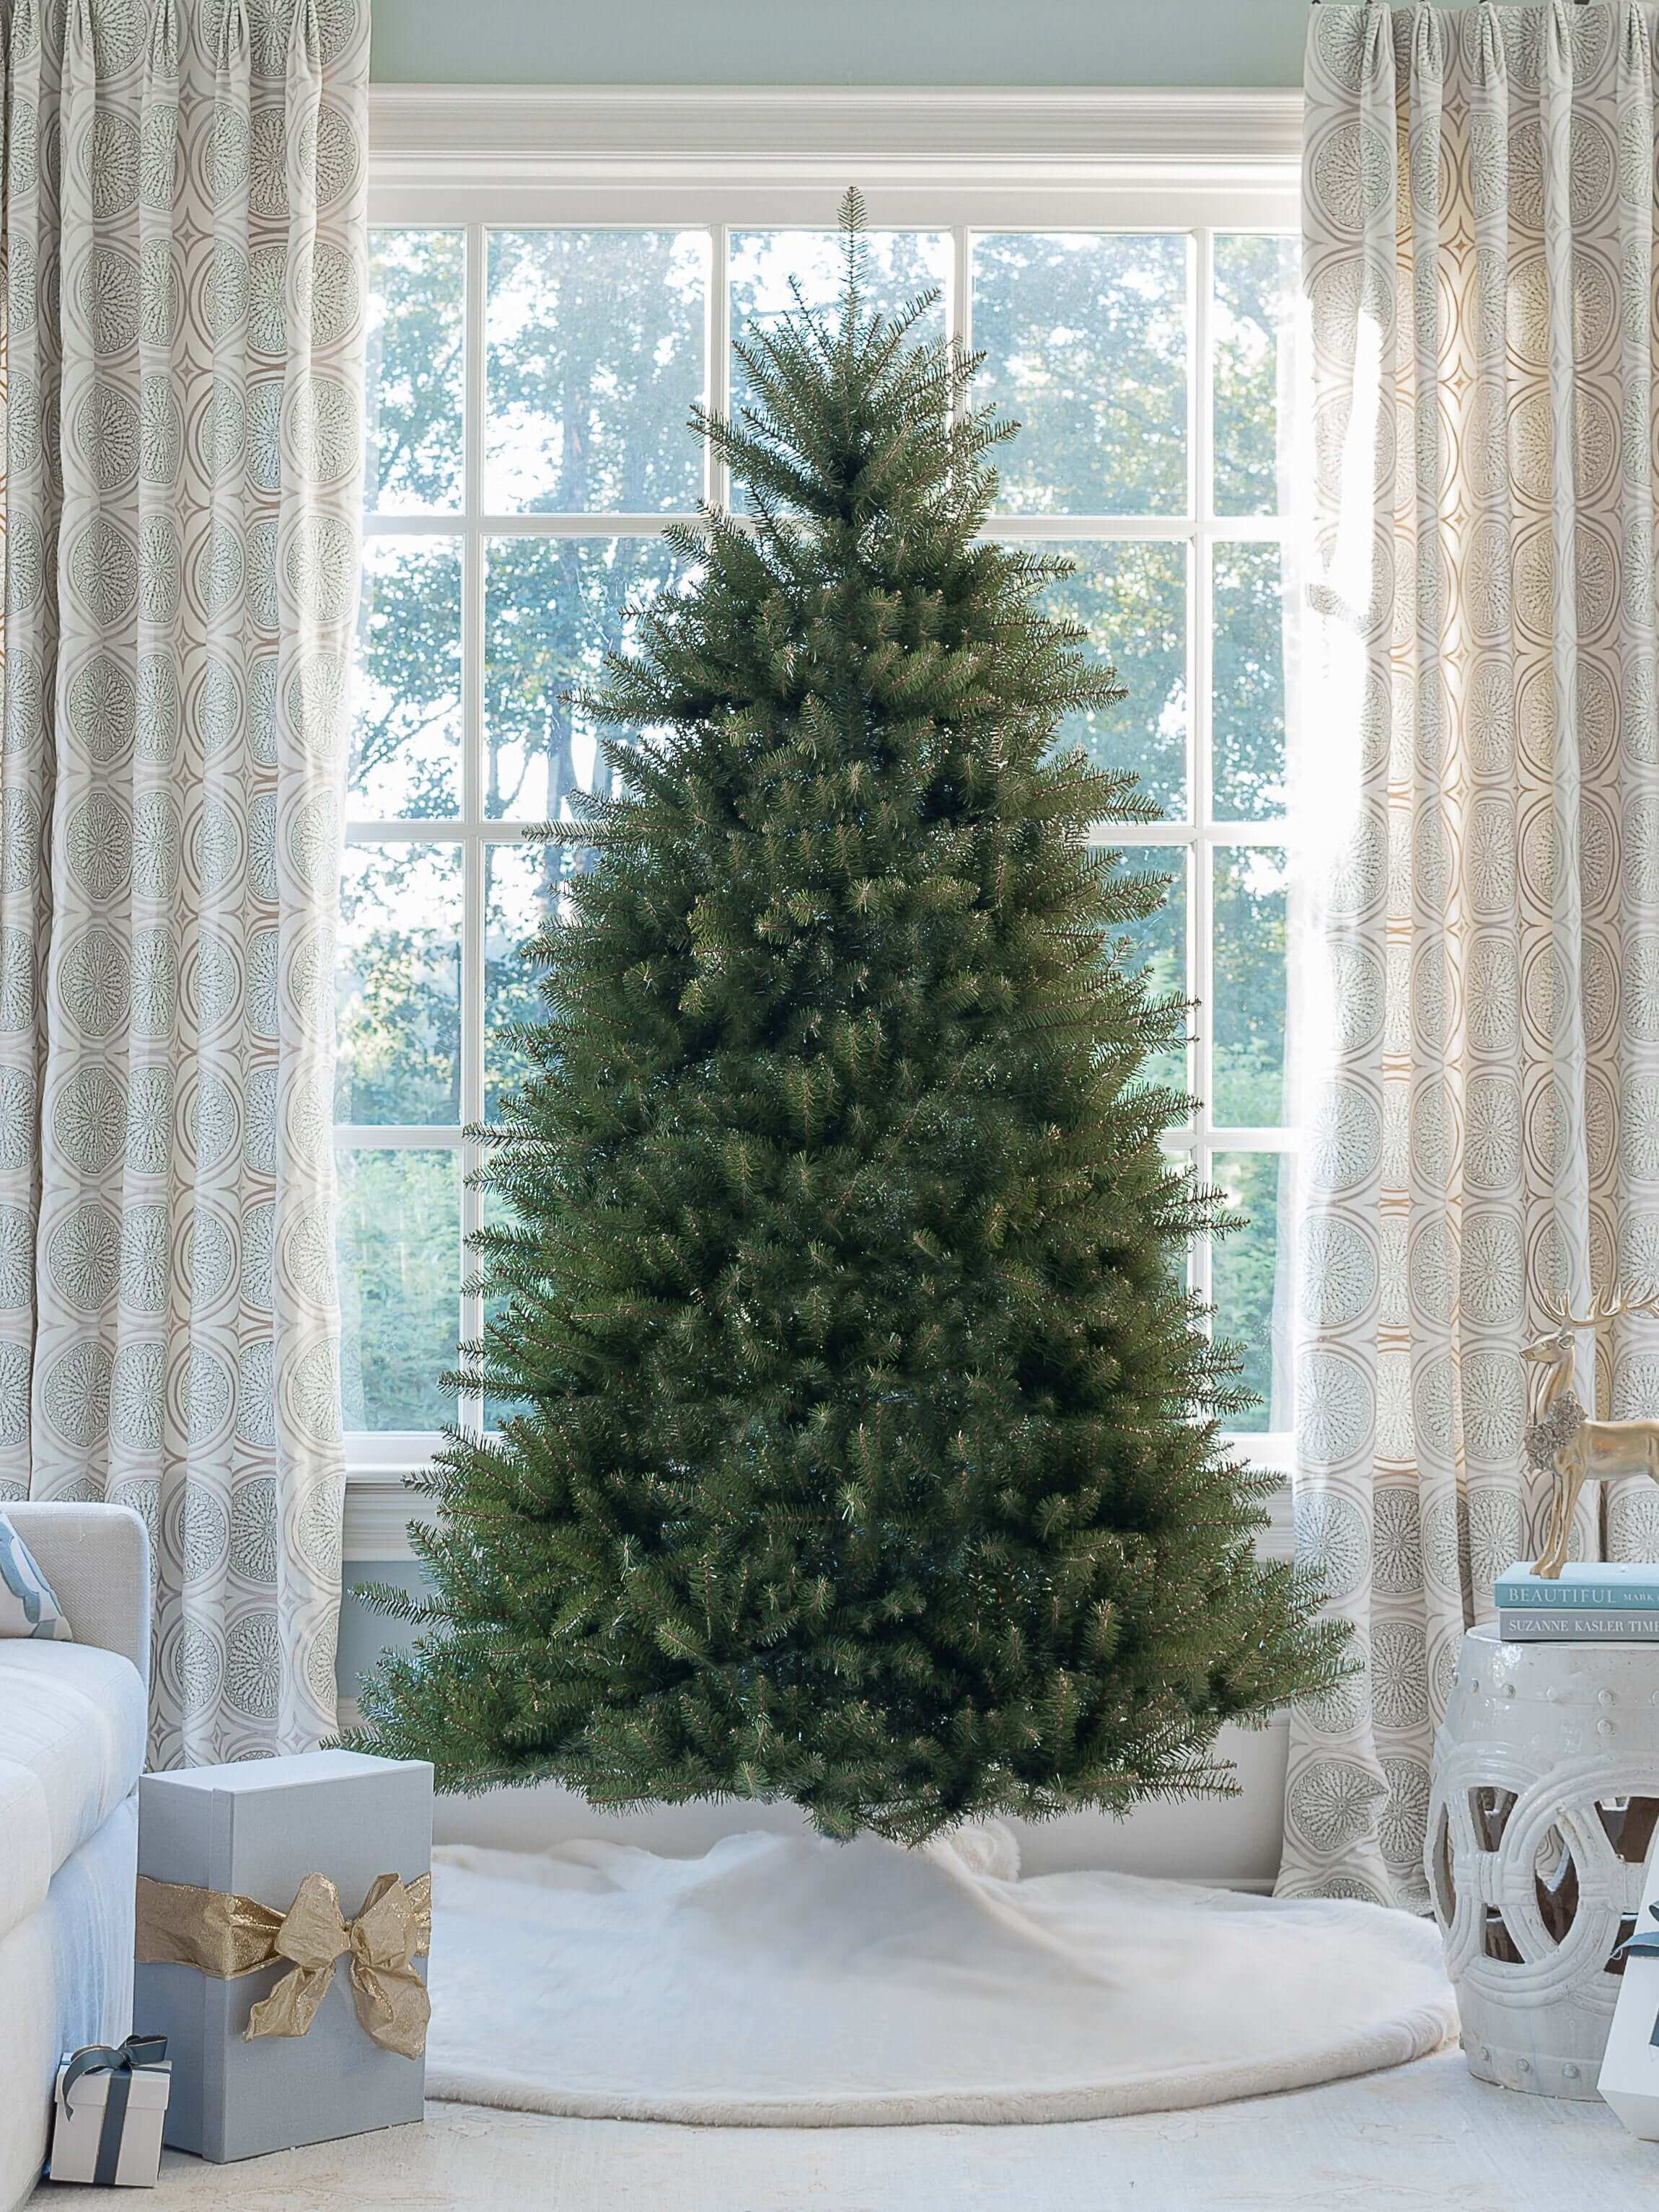 Image of 7.5' Yorkshire Fir Artificial Christmas Tree with 600 Warm White LED Lights MARK BEAUTIFUL "IN 